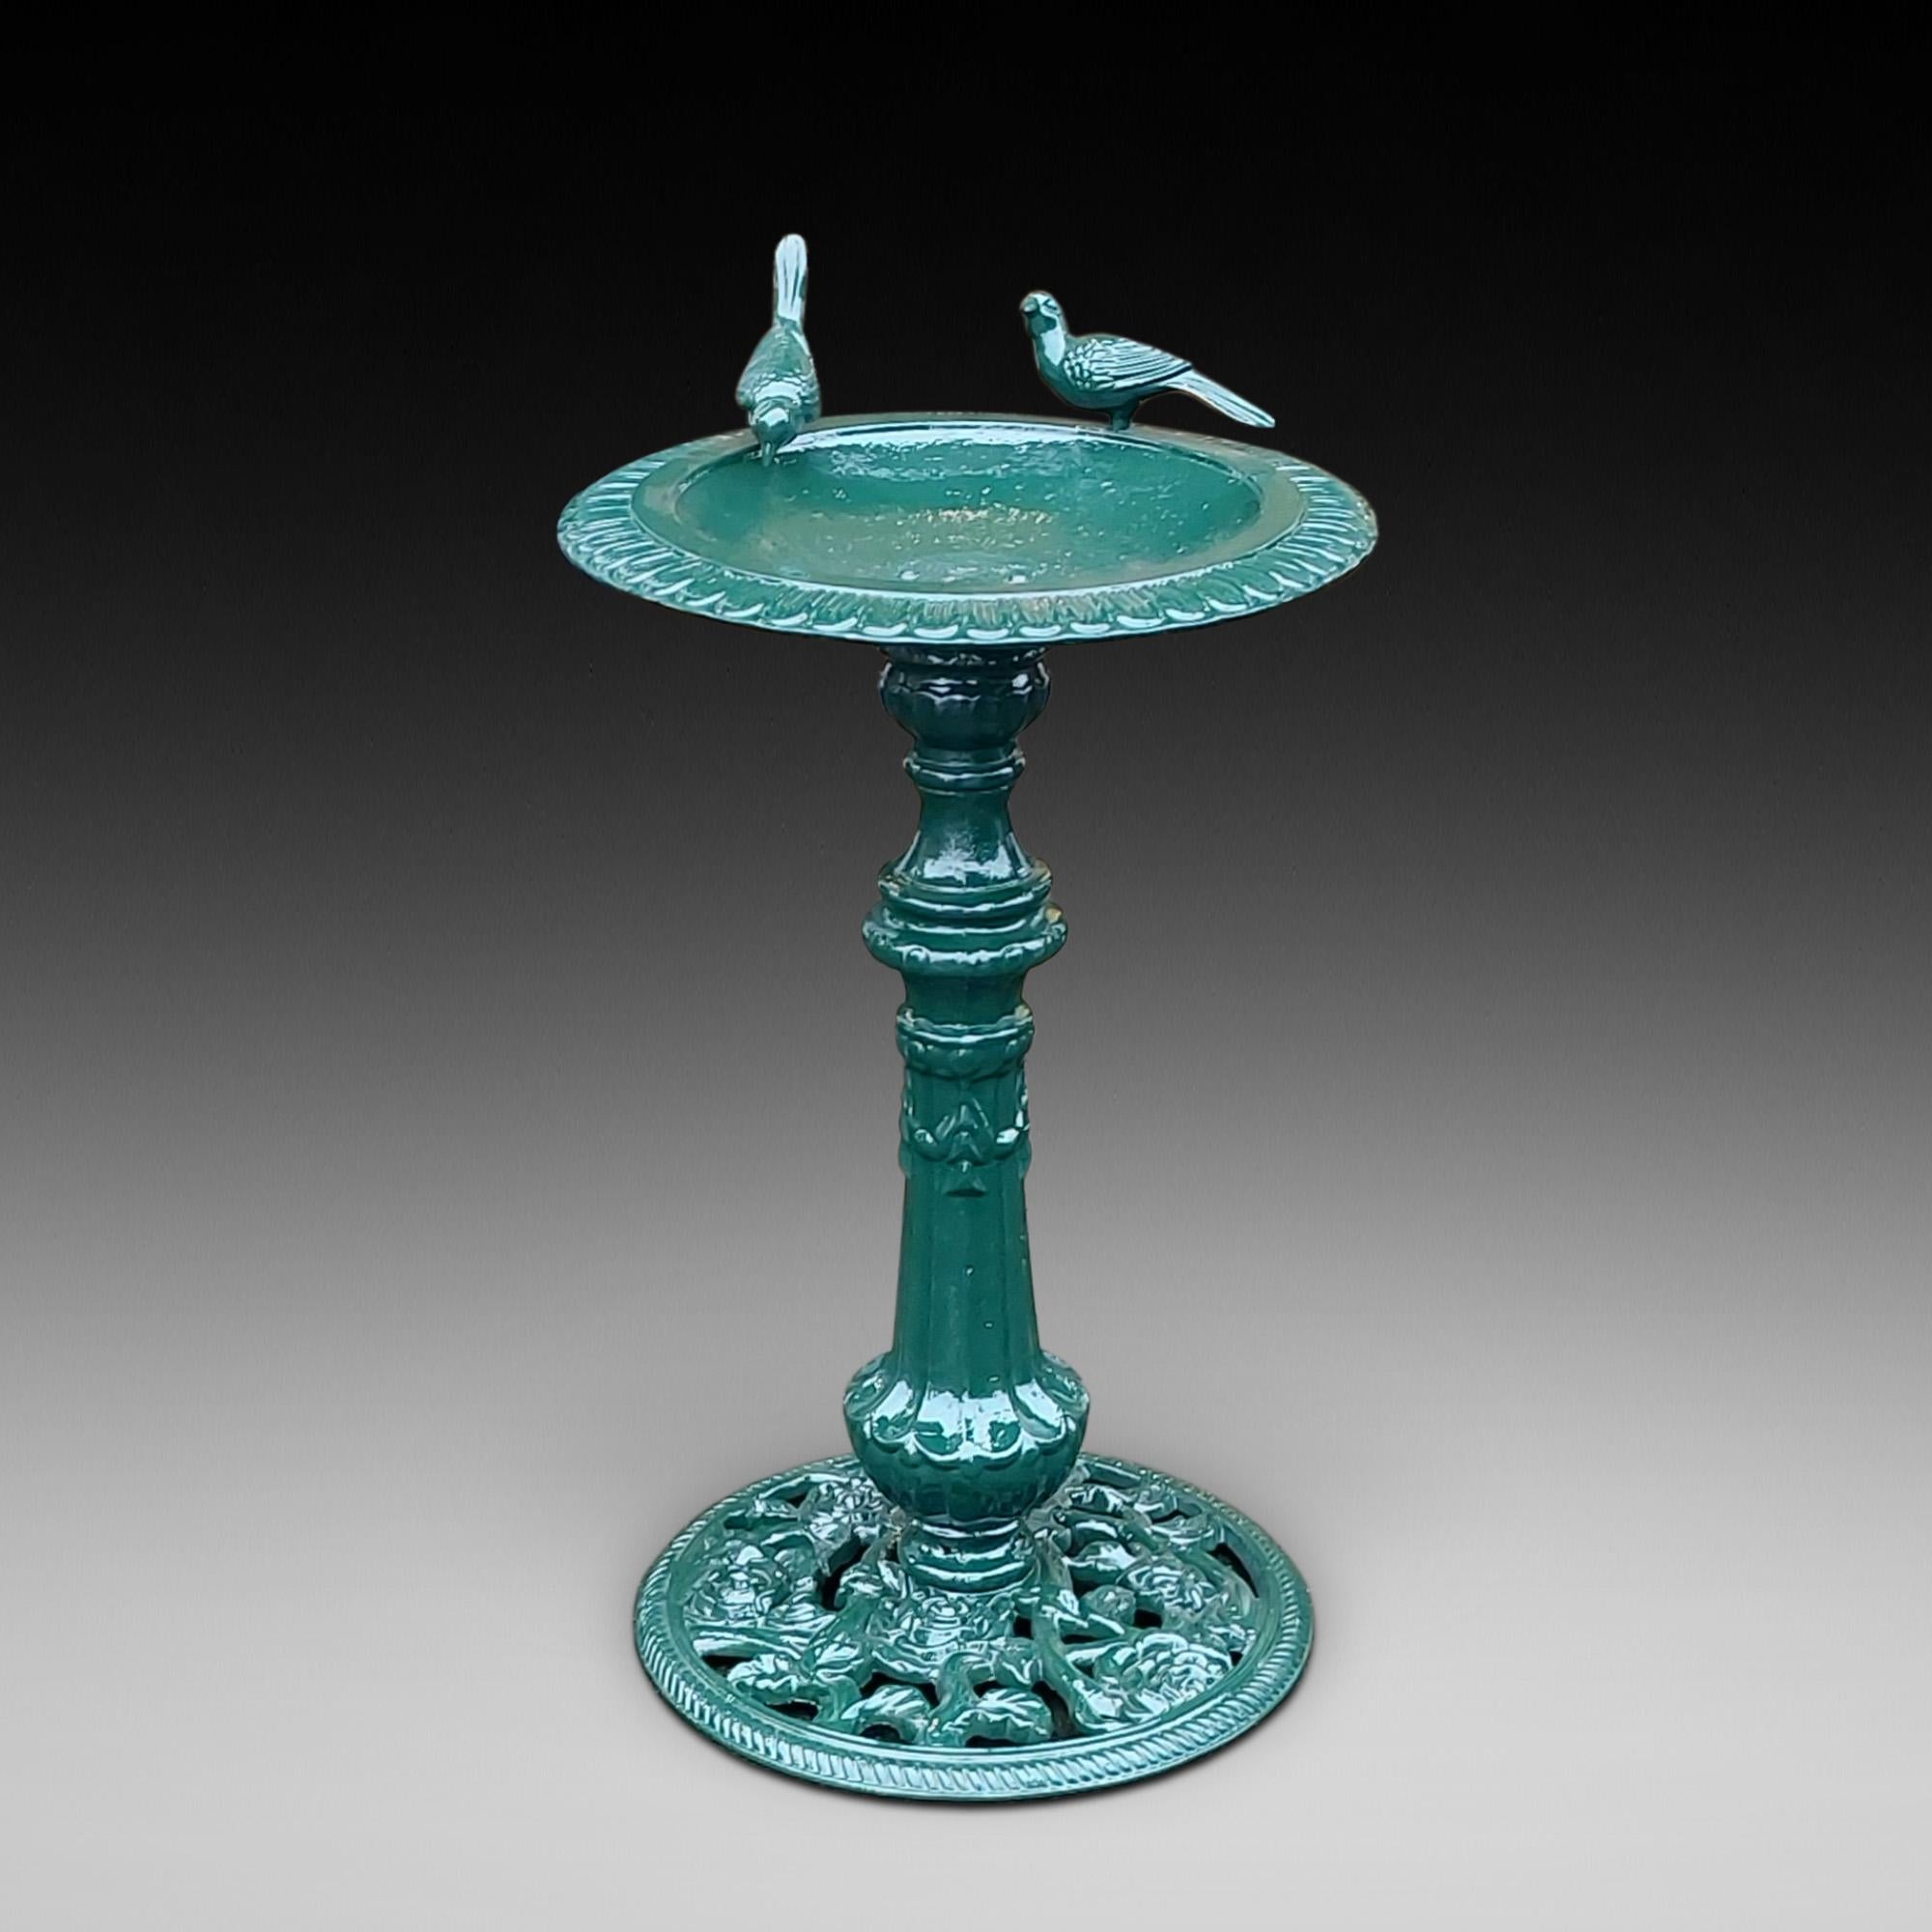 Early 20th Century Cast-Iron Bird Bath on green painted column & pierced foliate platform base, a pair of doves to the gadrooned edge - 19